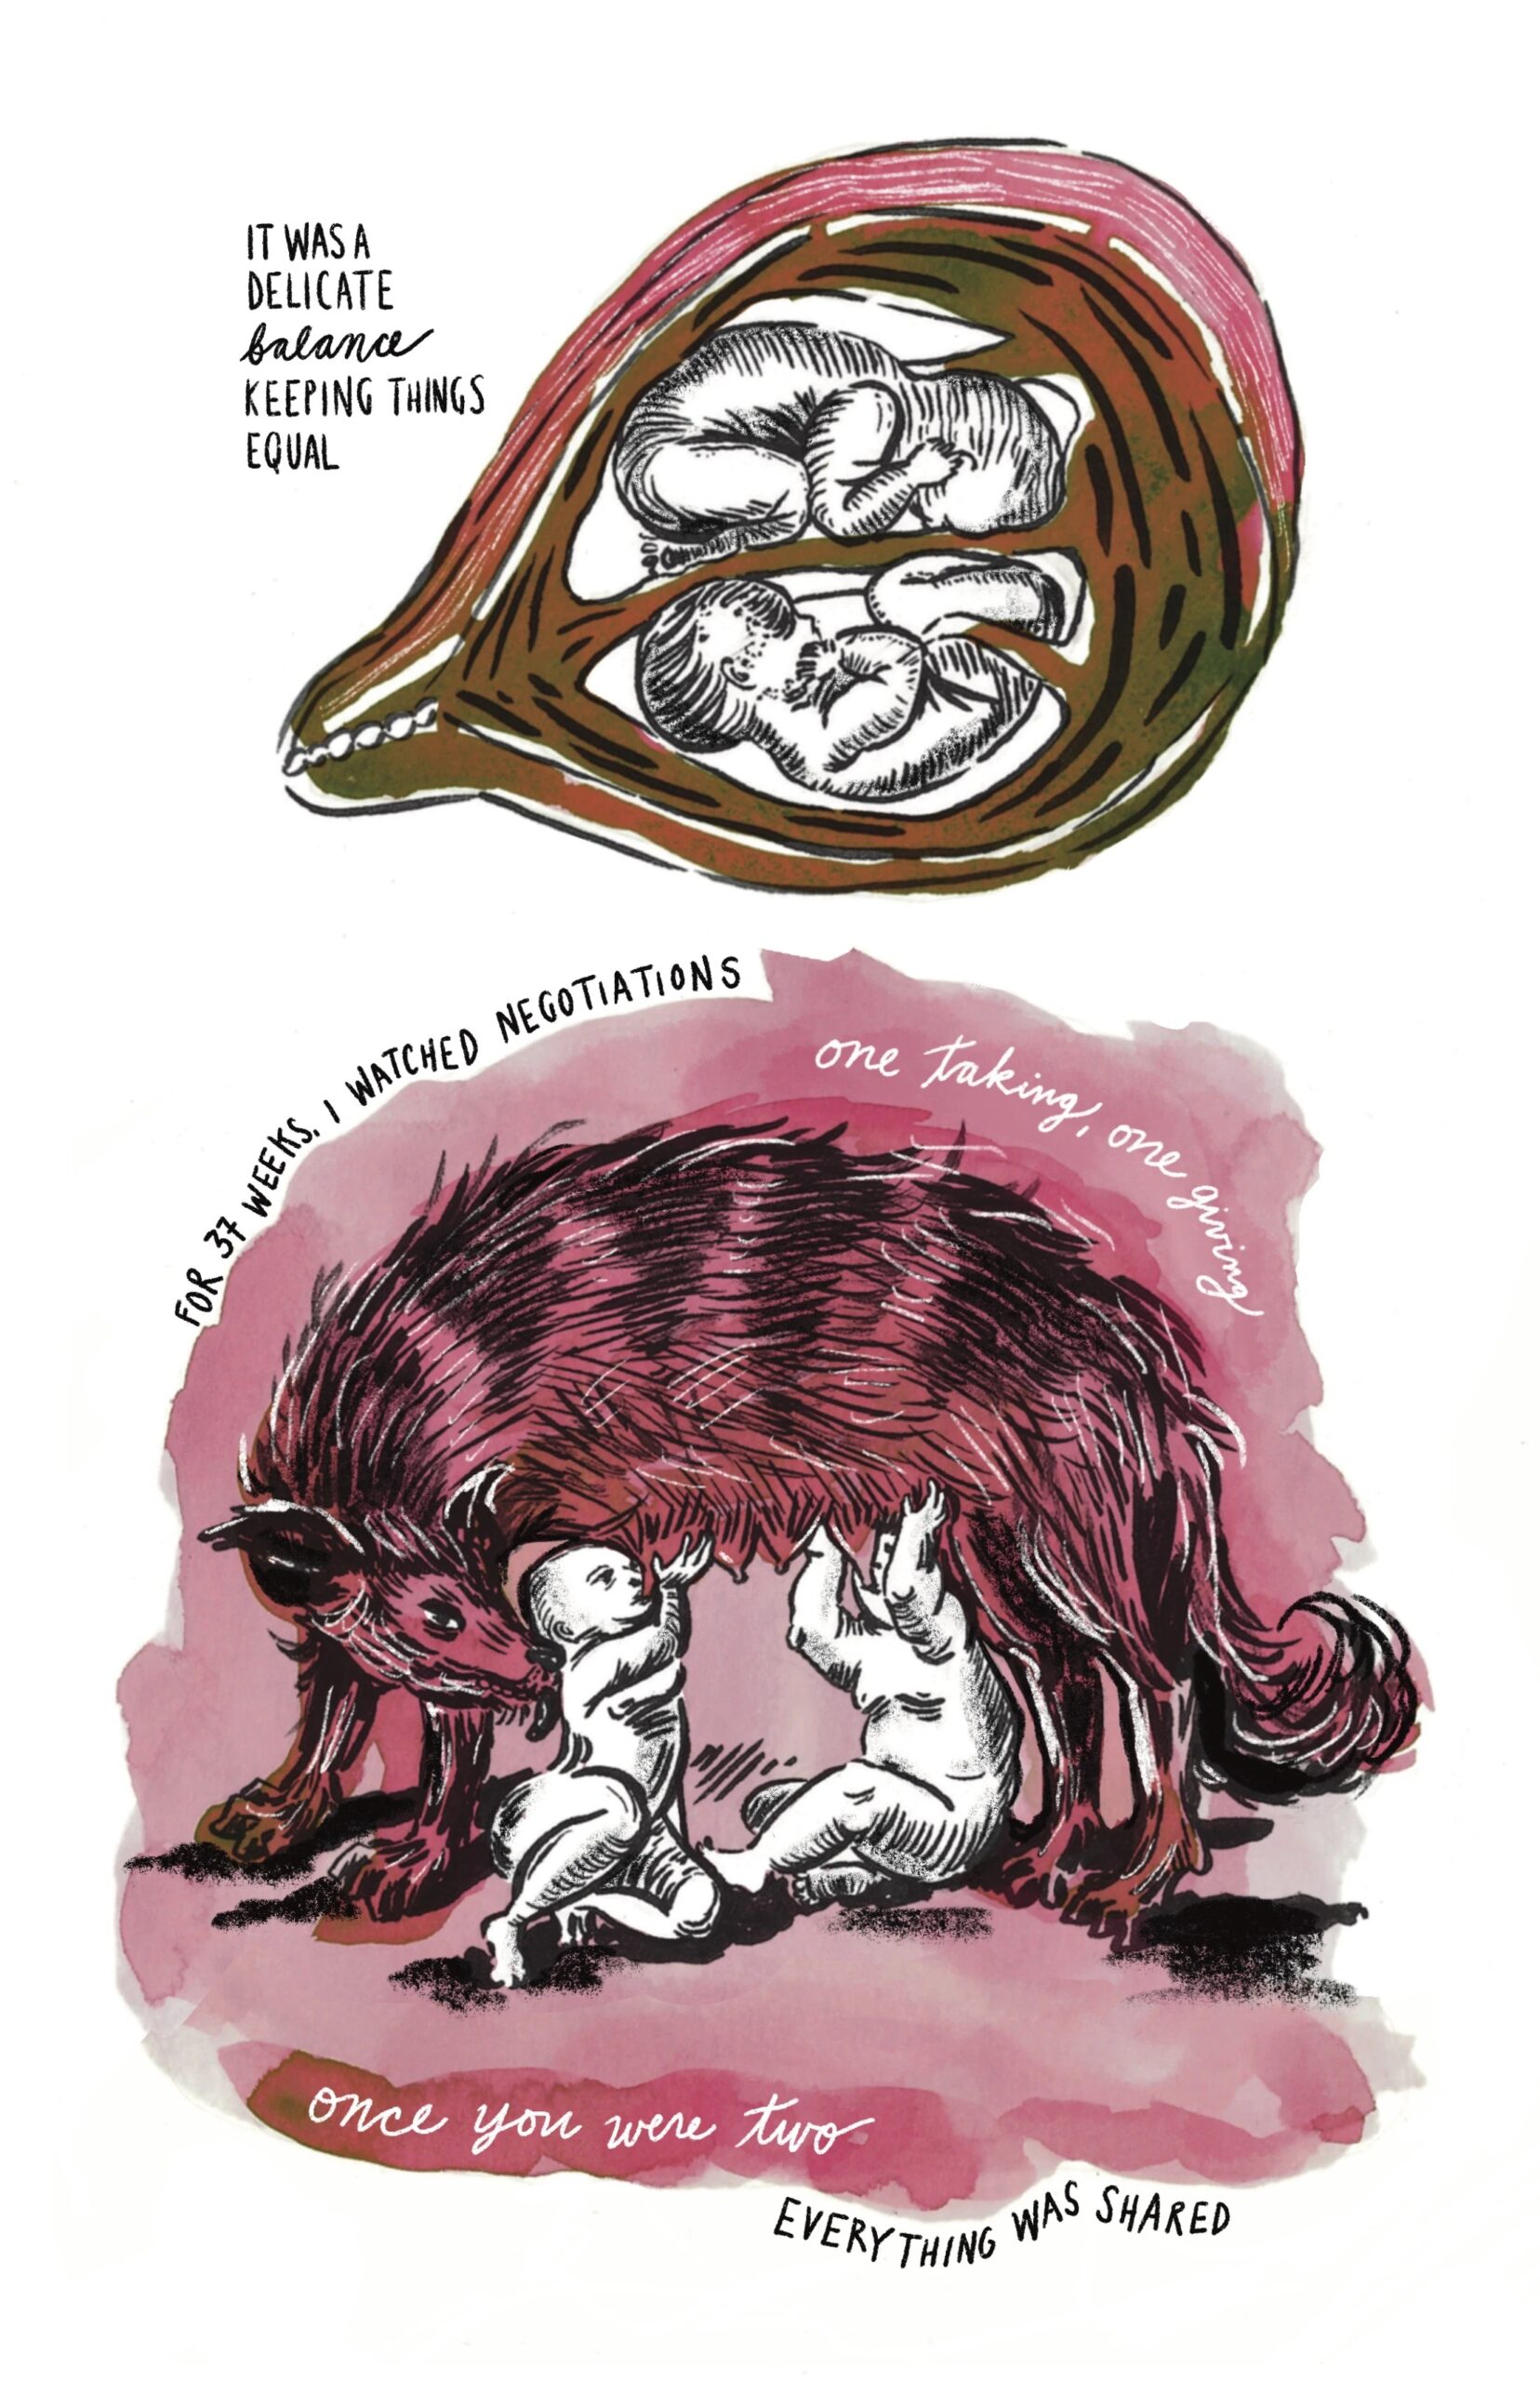 â€œIt was a delicate balance keeping things equal / for 37 weeks, I watched negotiations / one taking, one giving / once you were two / everything was sharedâ€

Two fetuses crouch next to each other in the womb, their heads each at the otherâ€™s feet. The two babies out of the womb suckle the teats of a wolf.